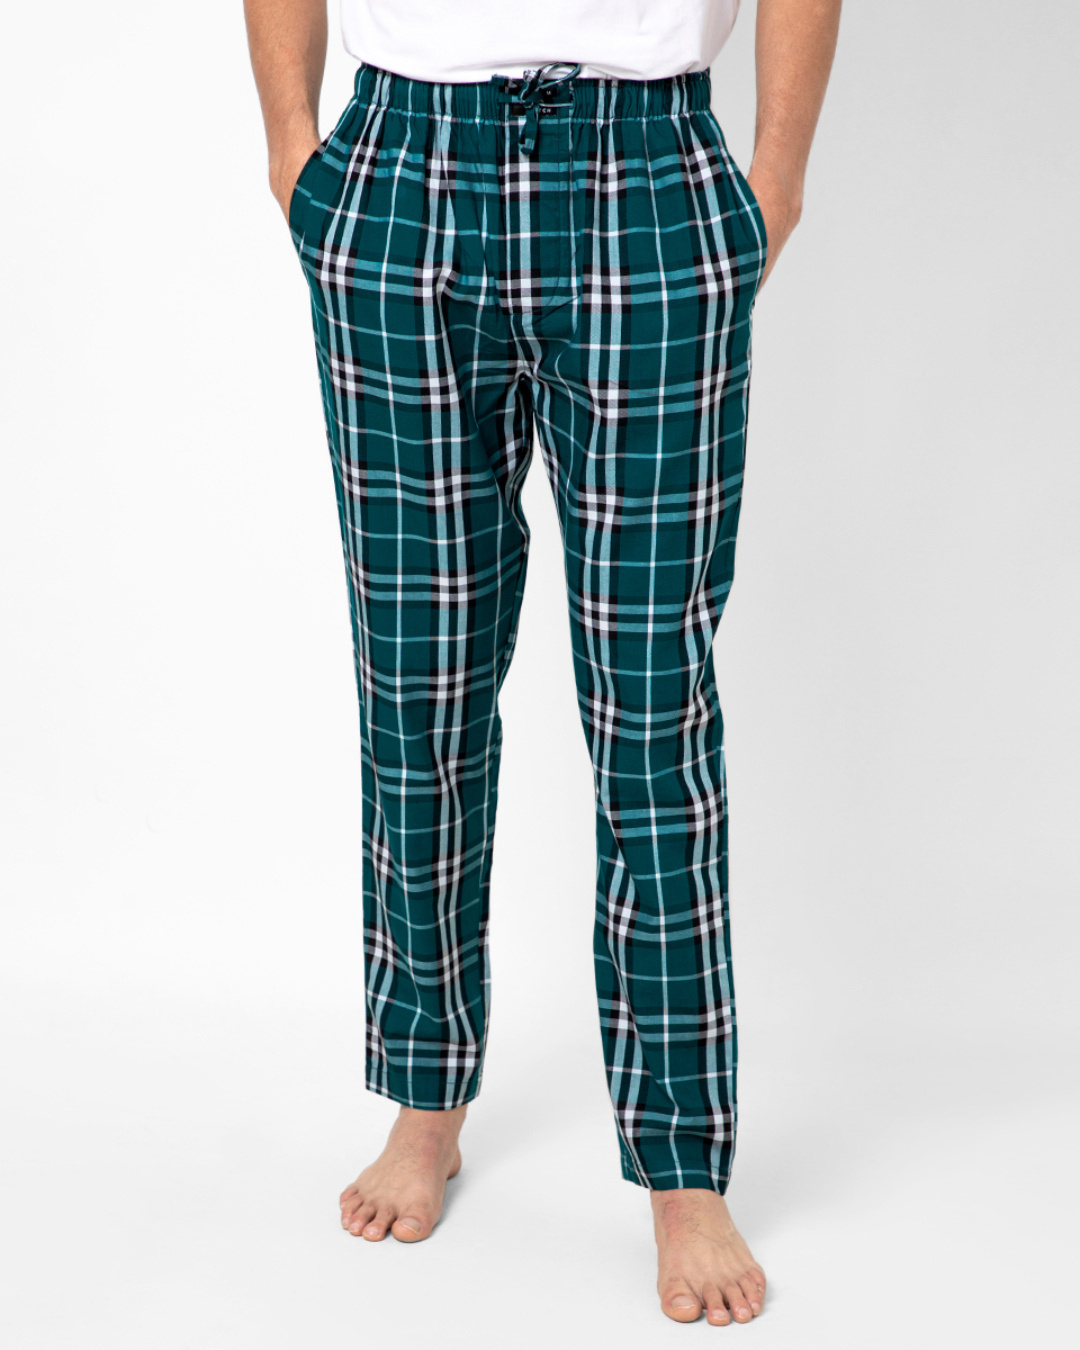 Buy Men's Green Checked Cotton Relaxed Fit Pyjamas Online in India at ...